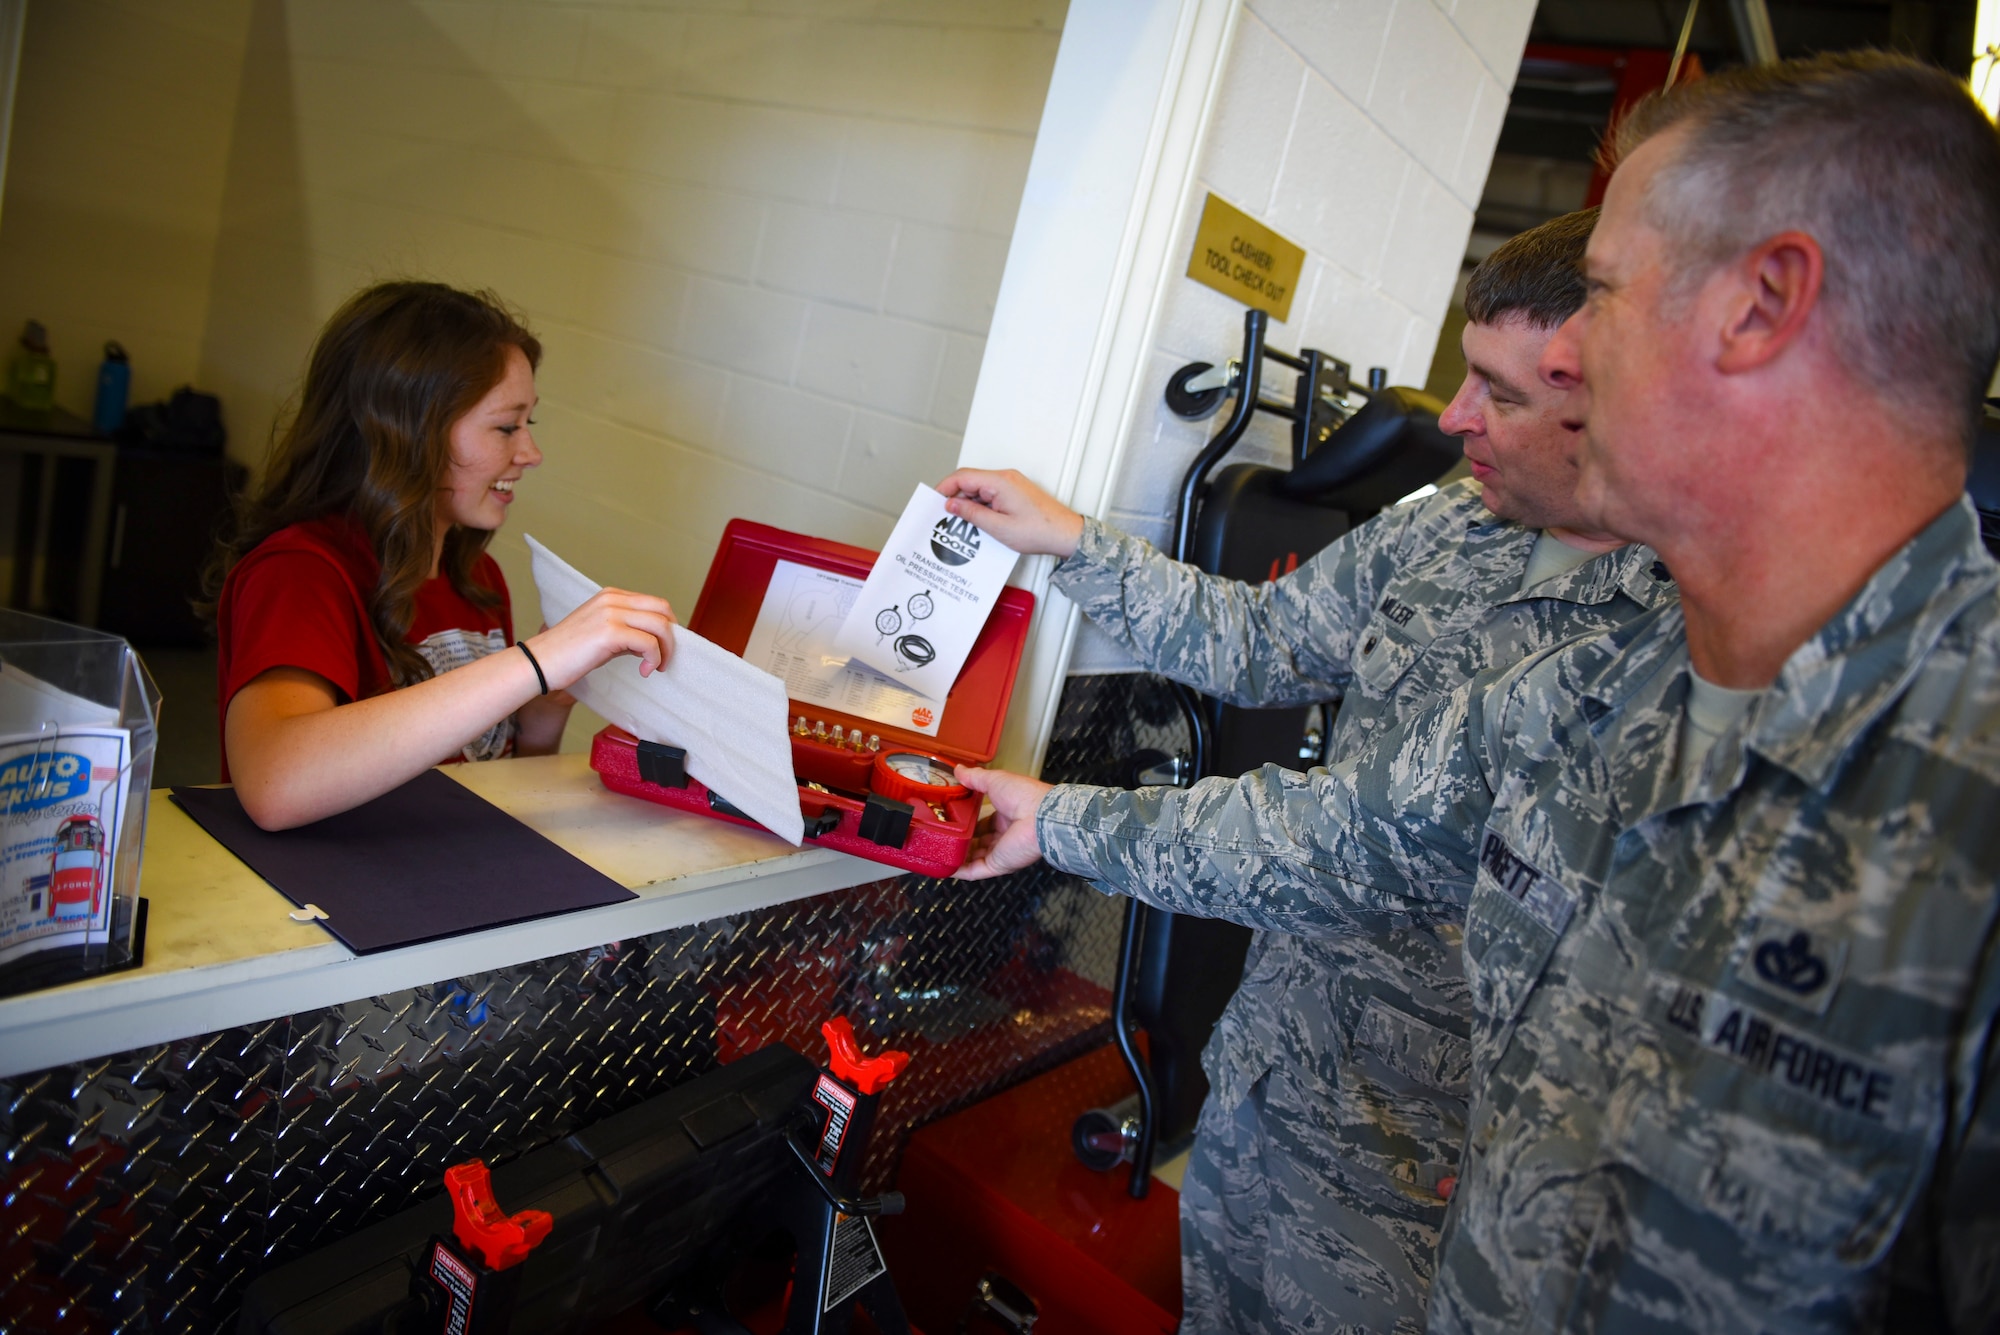 Kearsten Drown, 99th Force Support Squadron Auto Hobby Shop cashier, hands a set of gauges to Lt. Col. Paul Miller, 99th Mission Support Group deputy commander, and Chief Master Sgt. Rob Padgett, 99 MSG superintendent, at Nellis Air Force Base, Nevada, May 31, 2018. The renovations included purchasing new tools and equipment that customers can check out as well as a complete makeover inside the shop to provide a cleaner, climate-controlled area. (U.S. Air Force photo by Airman 1st Class Andrew D. Sarver)